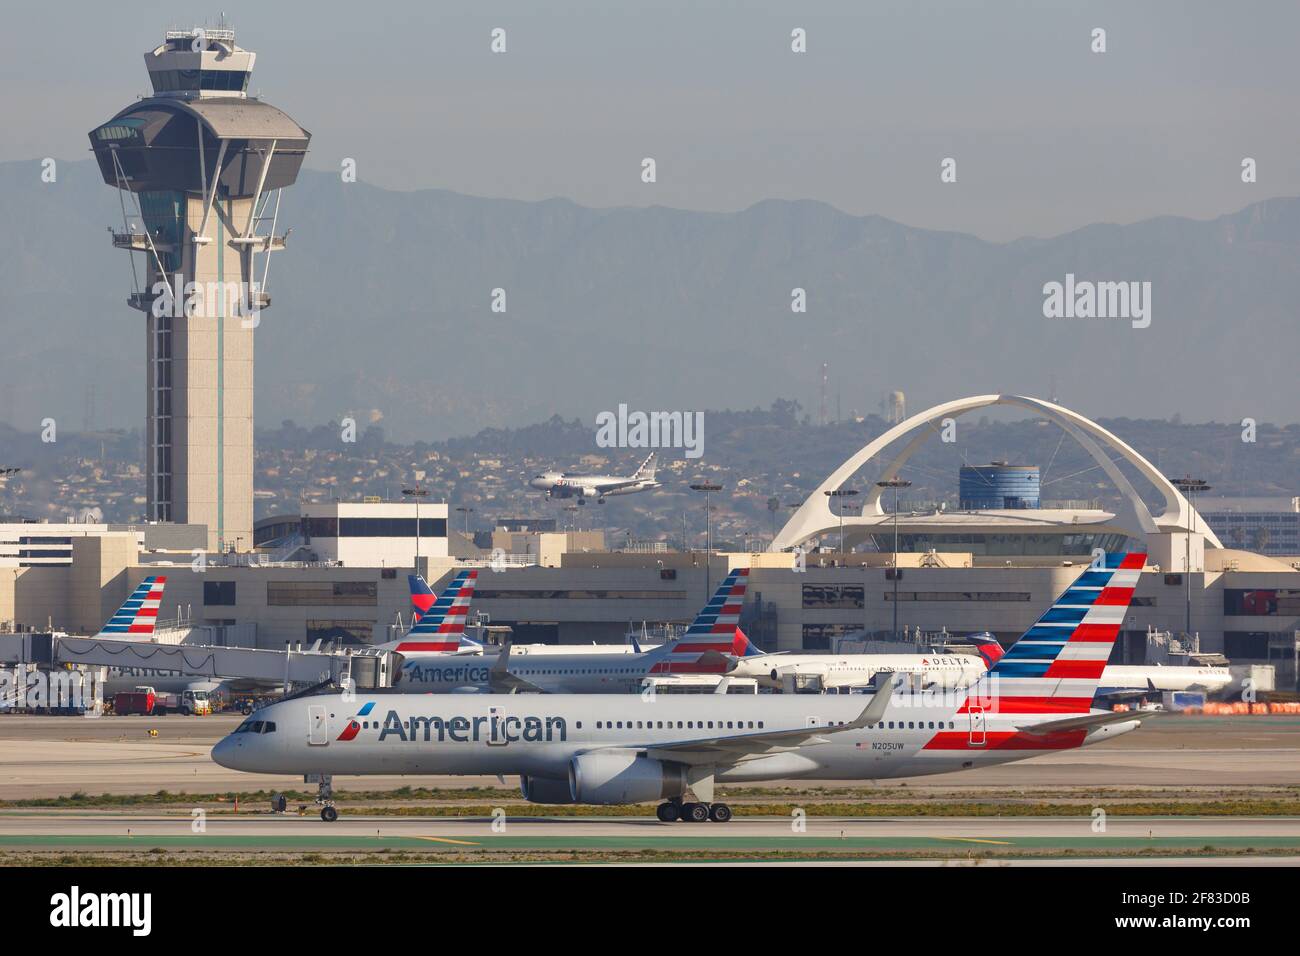 Los Angeles, USA - 20. February 2016: American Airlines Boeing 757-200 at Los Angeles airport (LAX) in the USA. Boeing is an aircraft manufacturer bas Stock Photo